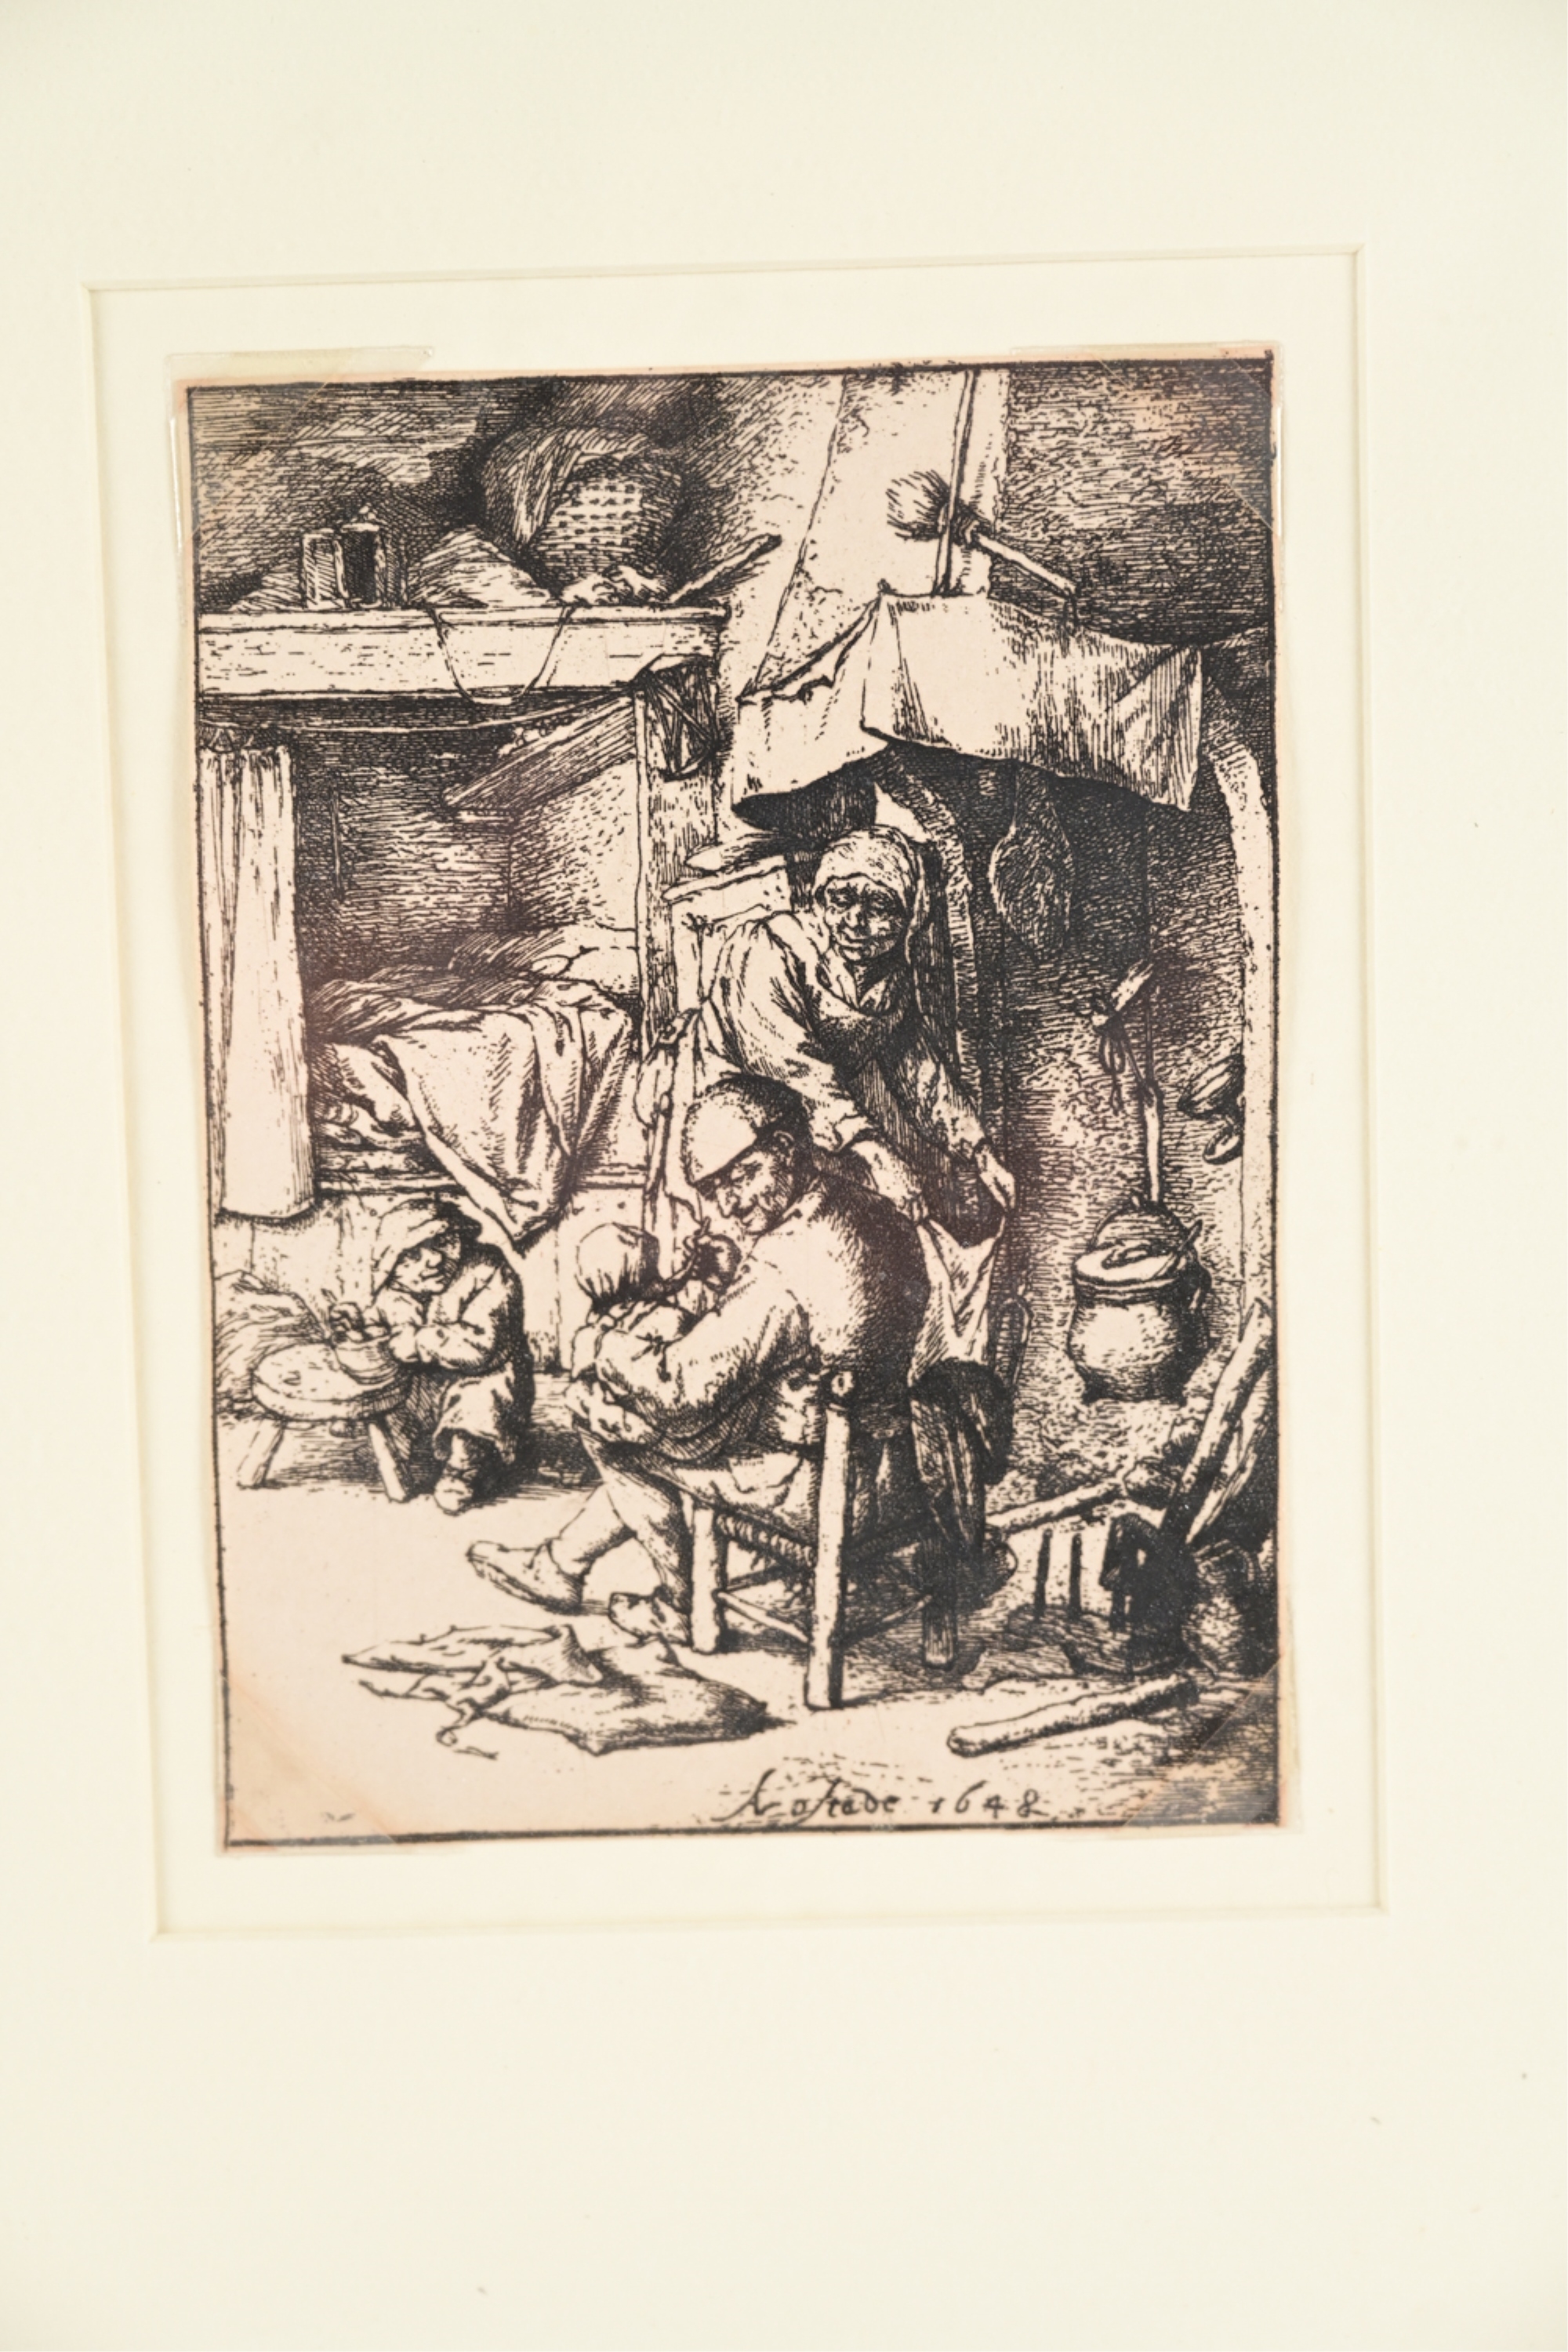 Artwork by Adriaen van Ostade, "The Pater Familias" or Der Familienvater, Made of Etching